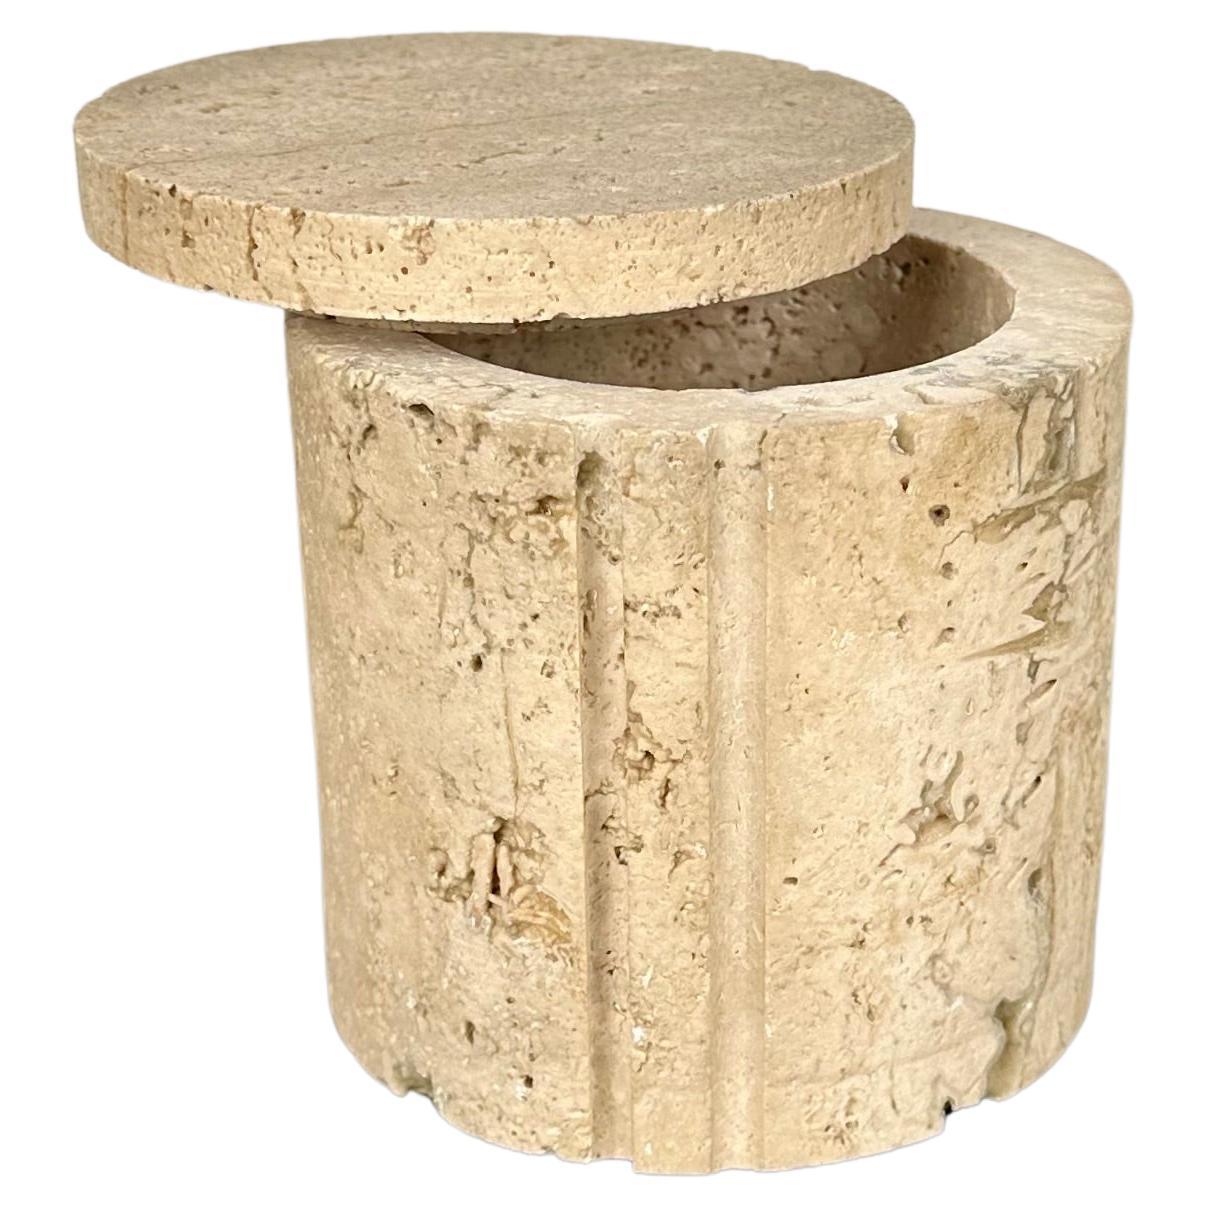 Midcentury Decorative Box in Travertine by Fratelli Mannelli, Italy, 1970s